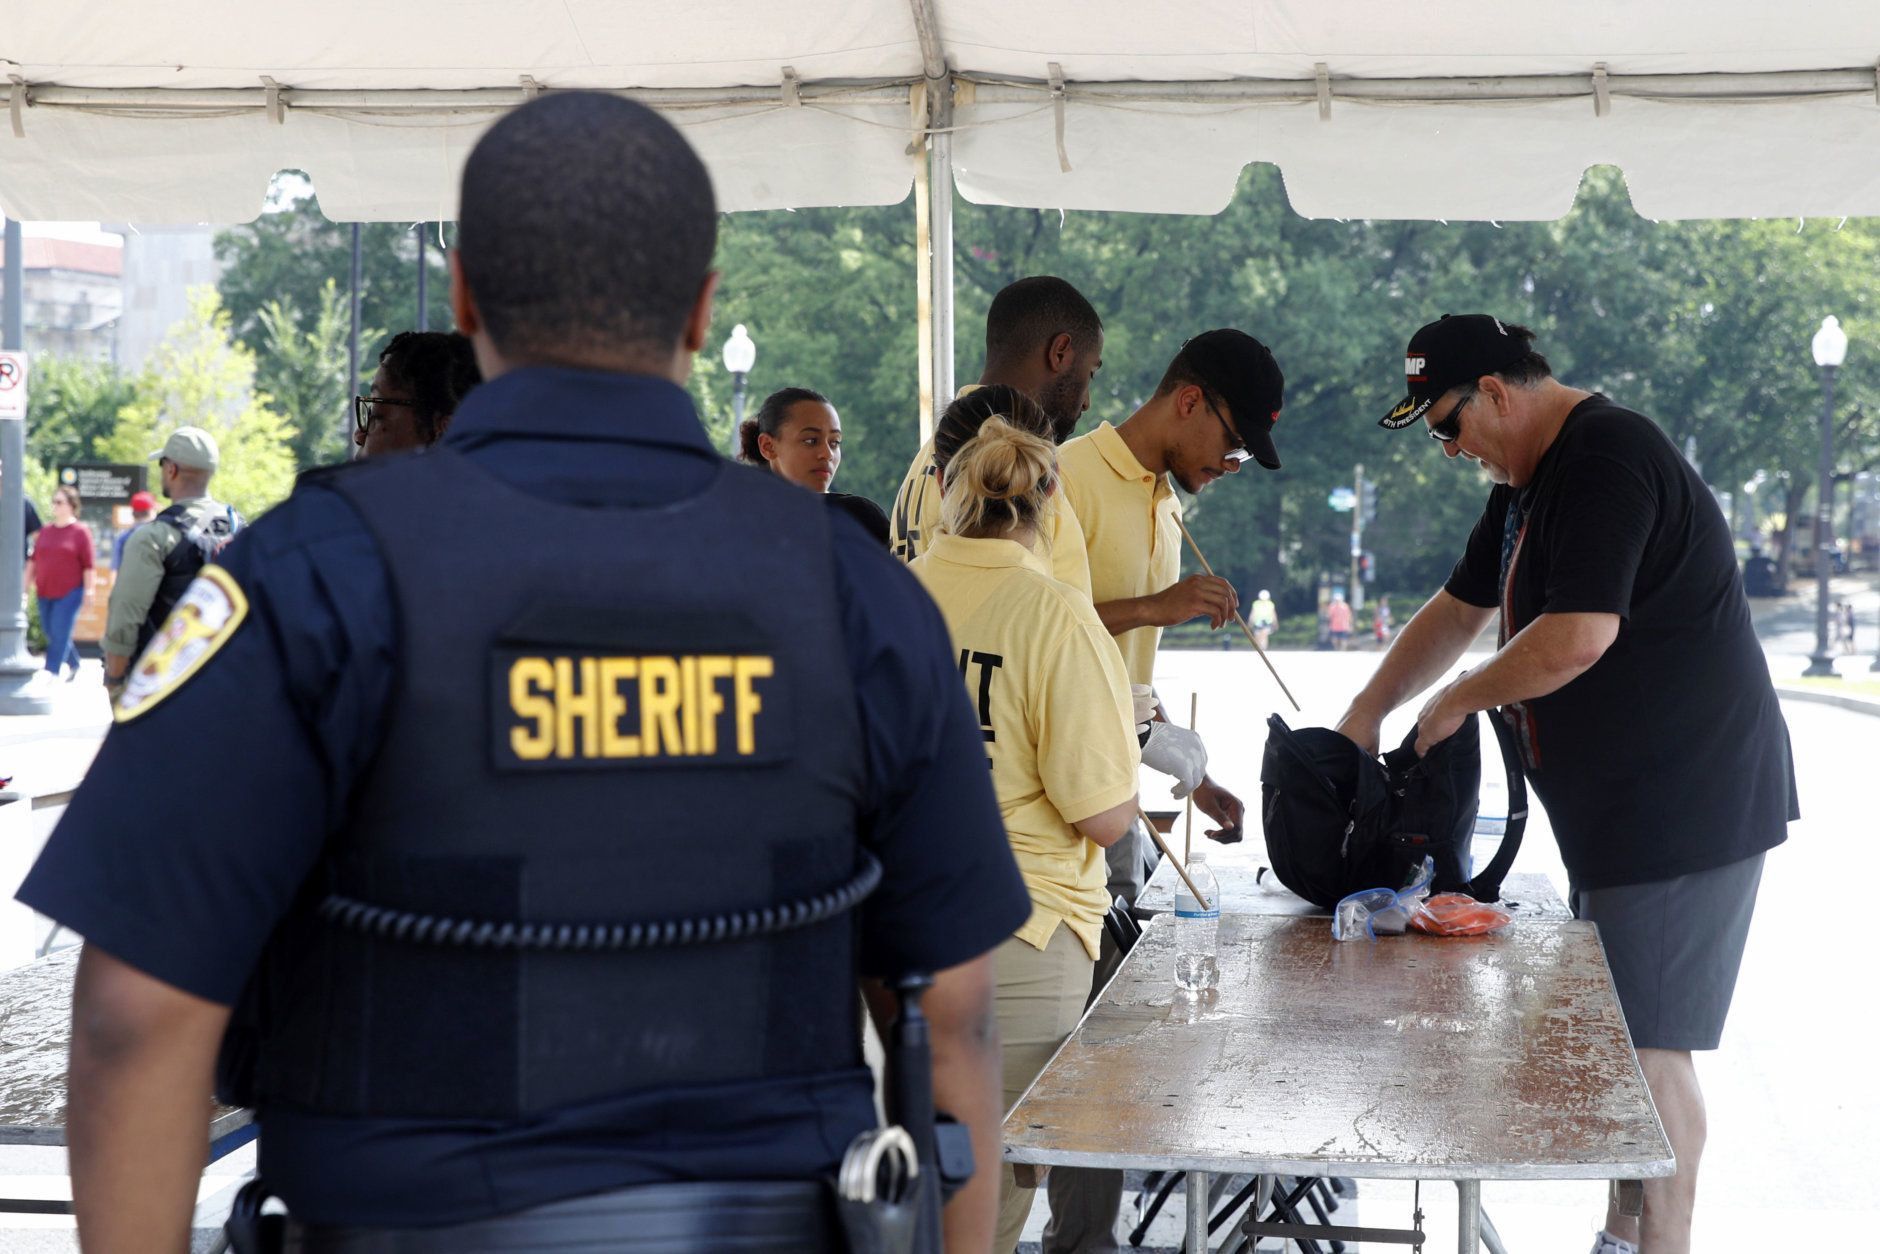 Security guards check bags at a checkpoint before Independence Day celebrations, Thursday, July 4, 2019, on the National Mall in Washington. (AP Photo/Patrick Semansky)